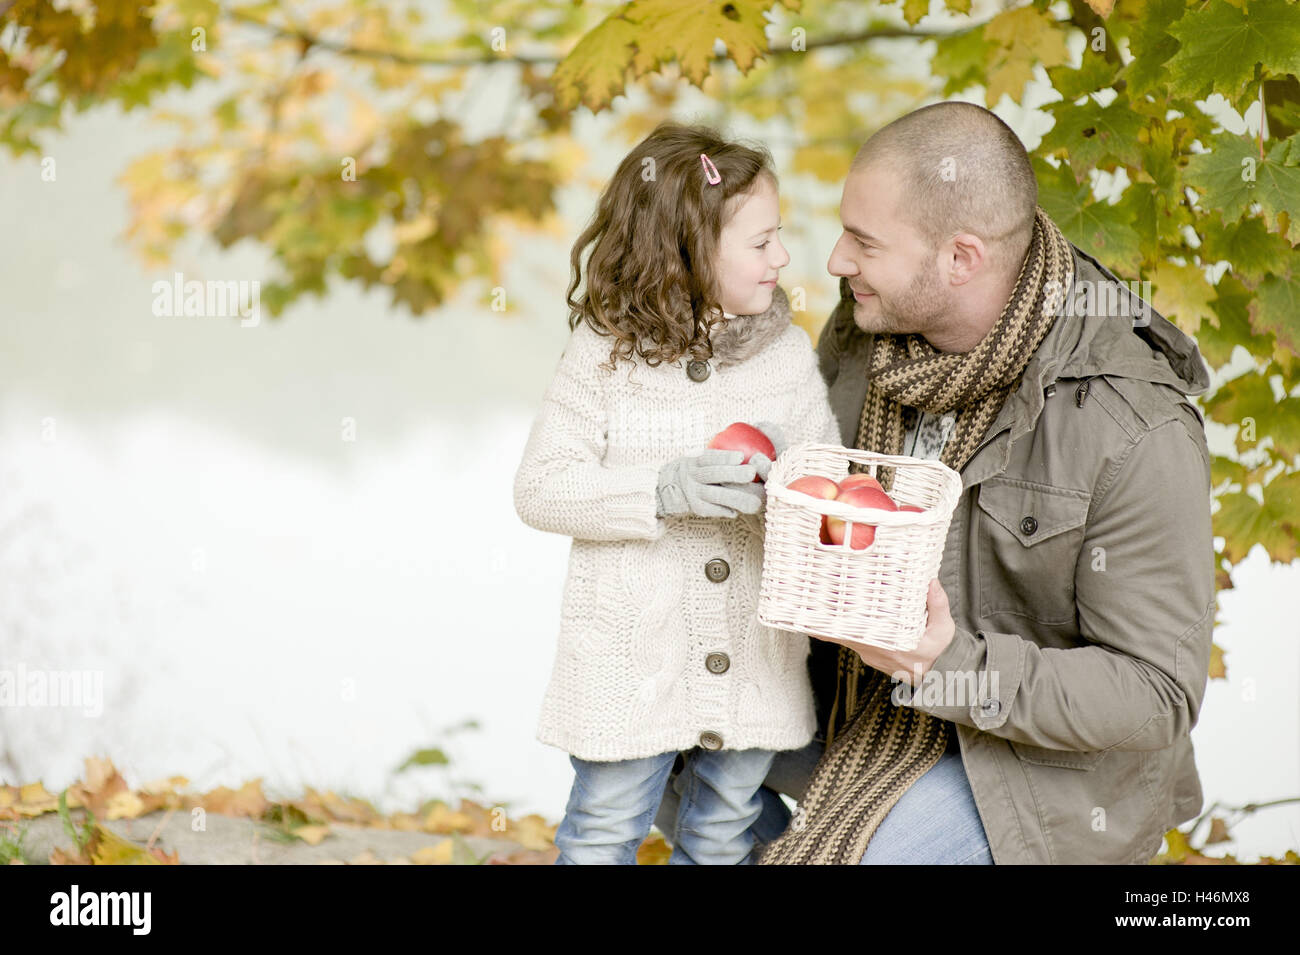 Father and subsidiary with apples, Stock Photo